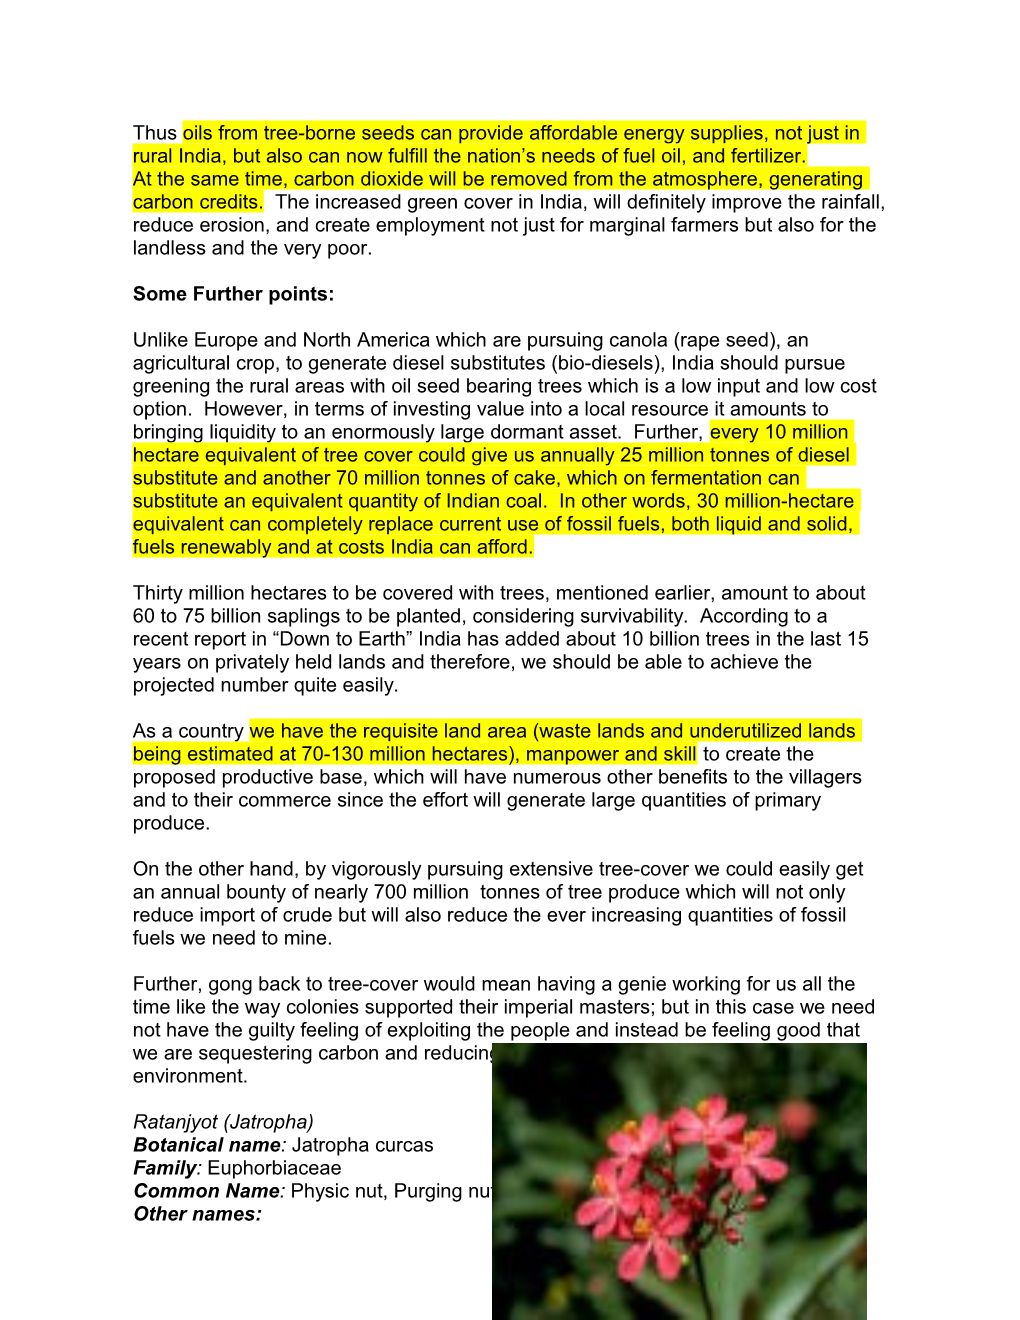 Short Notes on the Value, Benefit, Production and Utilization of JATROPHA CURCAS, Compiled